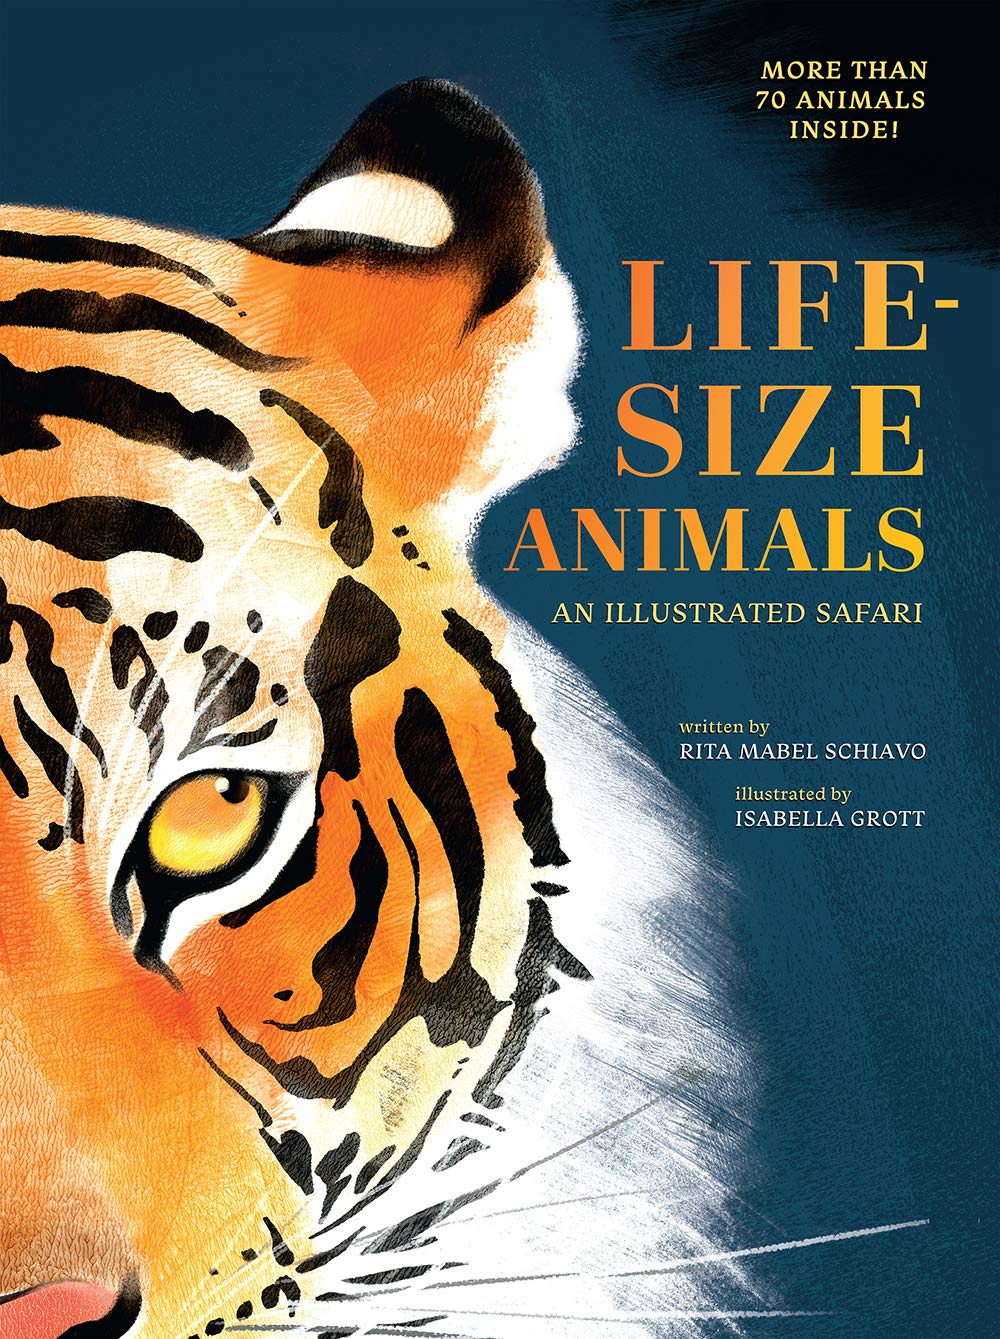 Life-Size Animals: An Illustrated Safari | Seattle Book Review